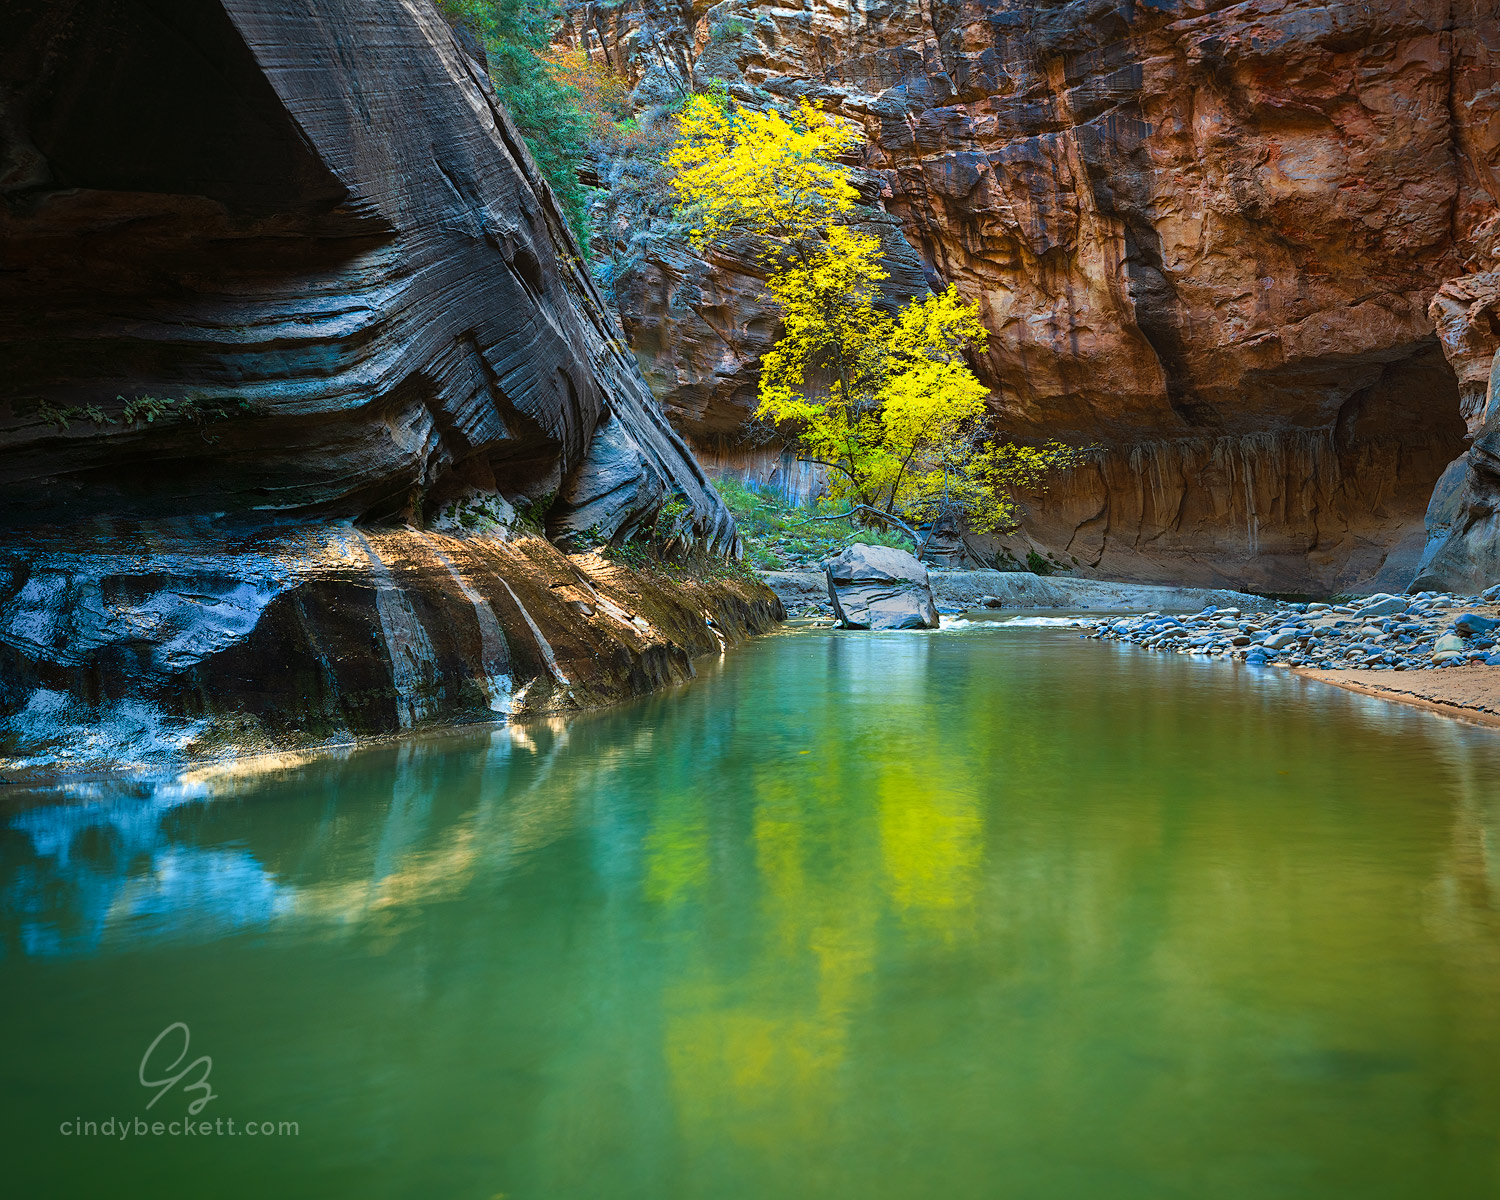 A calm pool of water along the Virgin River reflects an autumn cottonwood tree in this image taken in the narrow canyons of Zion National Park.